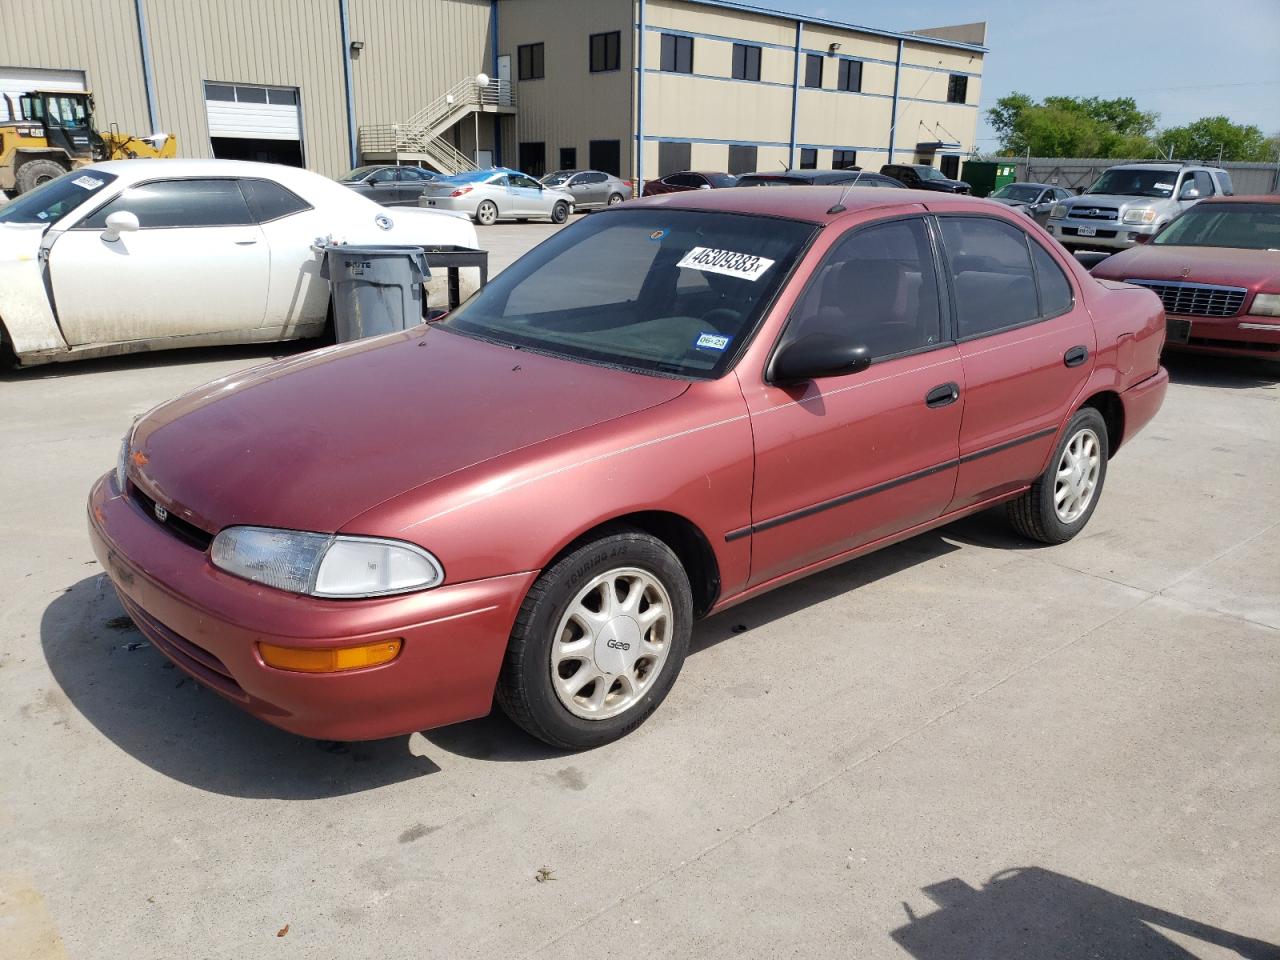 1997 GEO Prizm Base for sale at Copart Wilmer, TX Lot #46309*** |  SalvageReseller.com